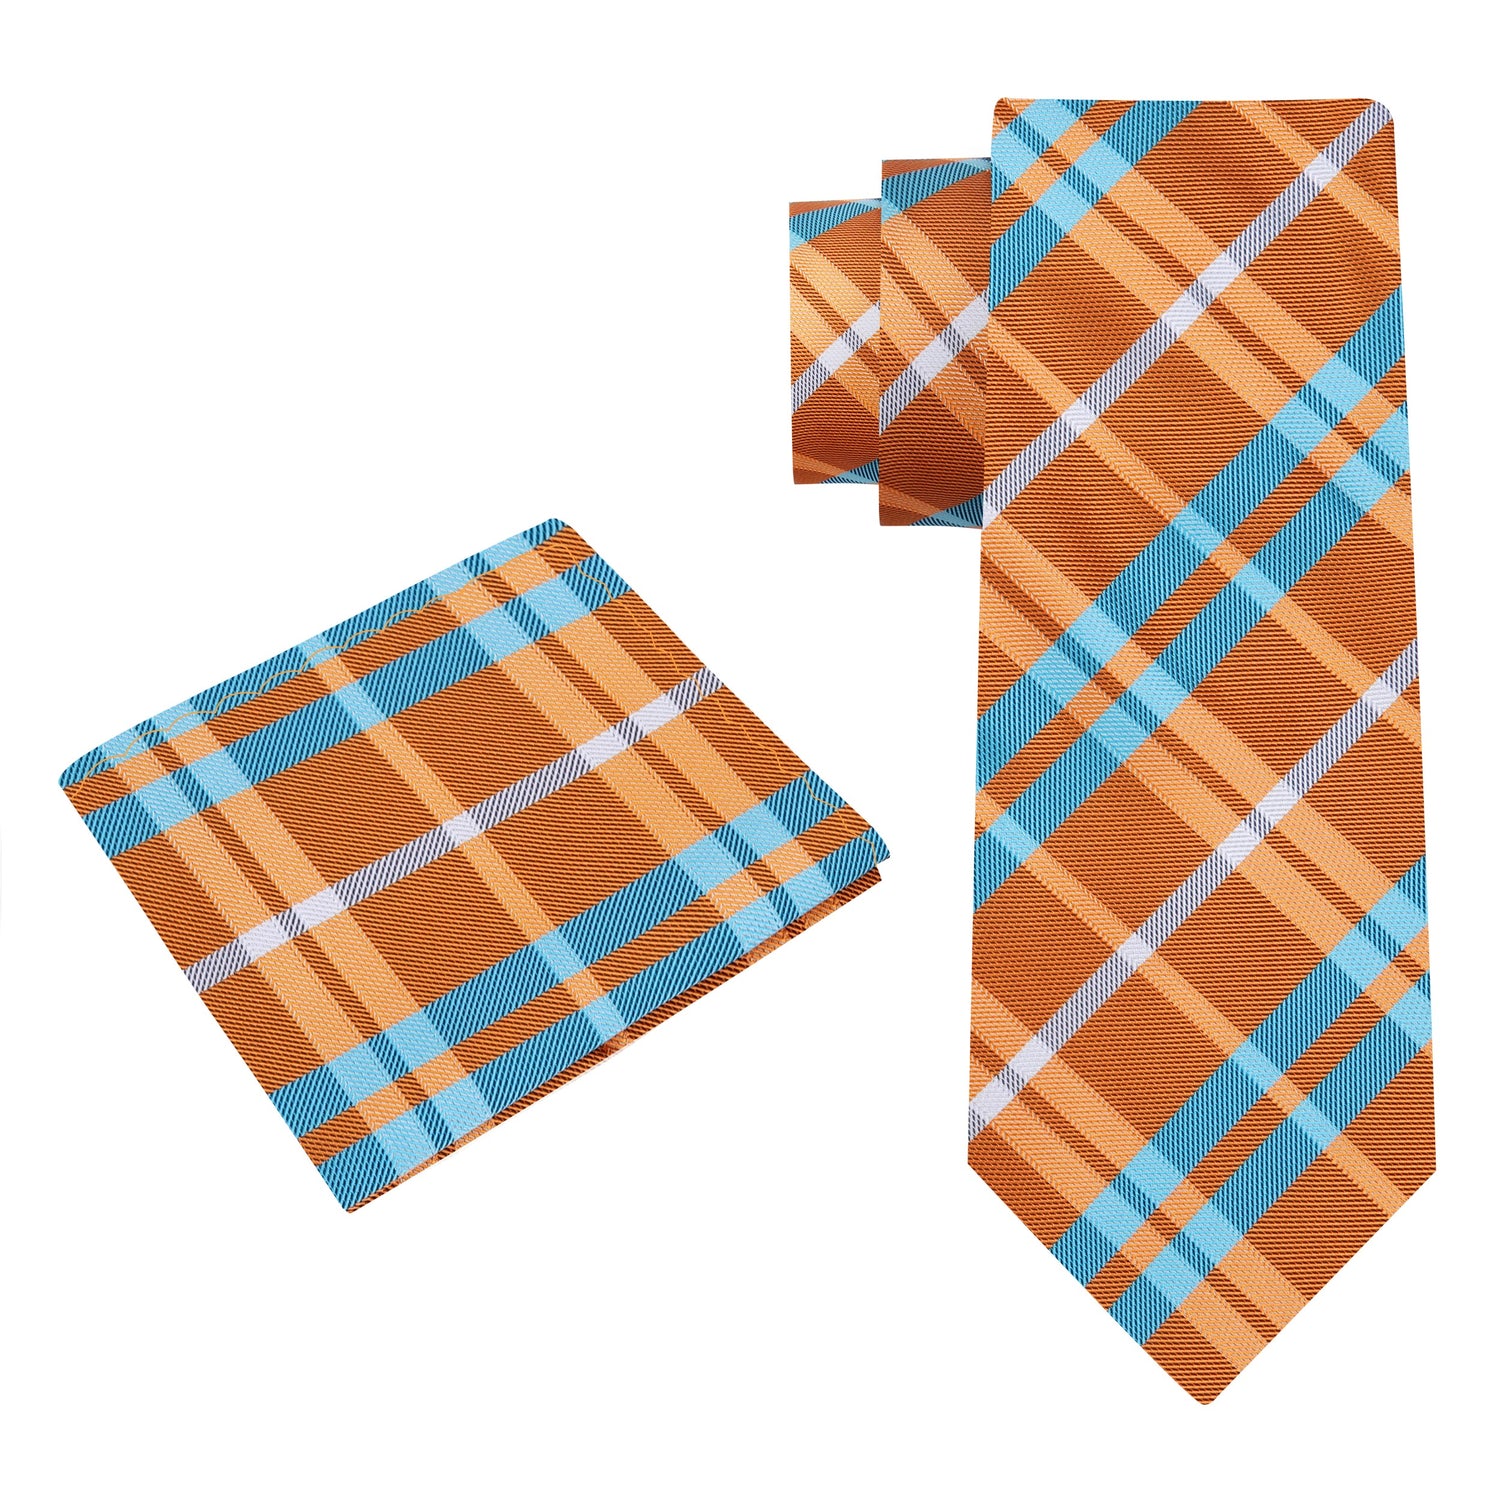 Alt View: Orange and Teal Plaid Tie and Square